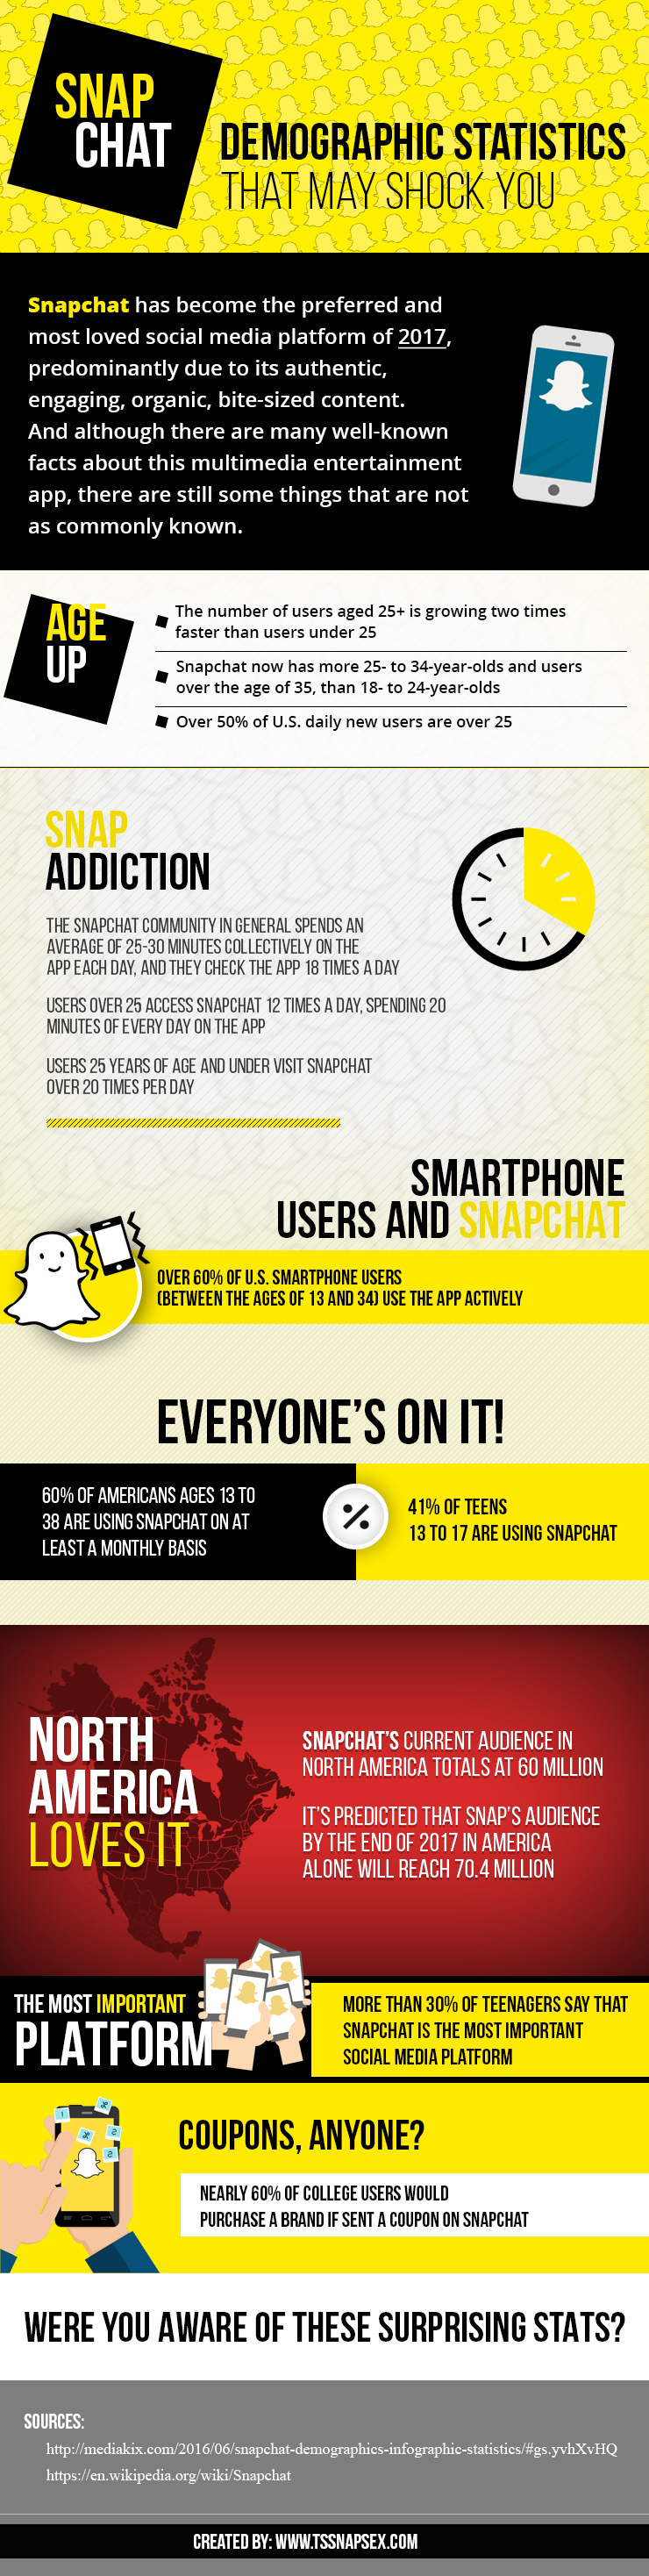 Snapchat Facts that Cause Shock and Awe - Infographic